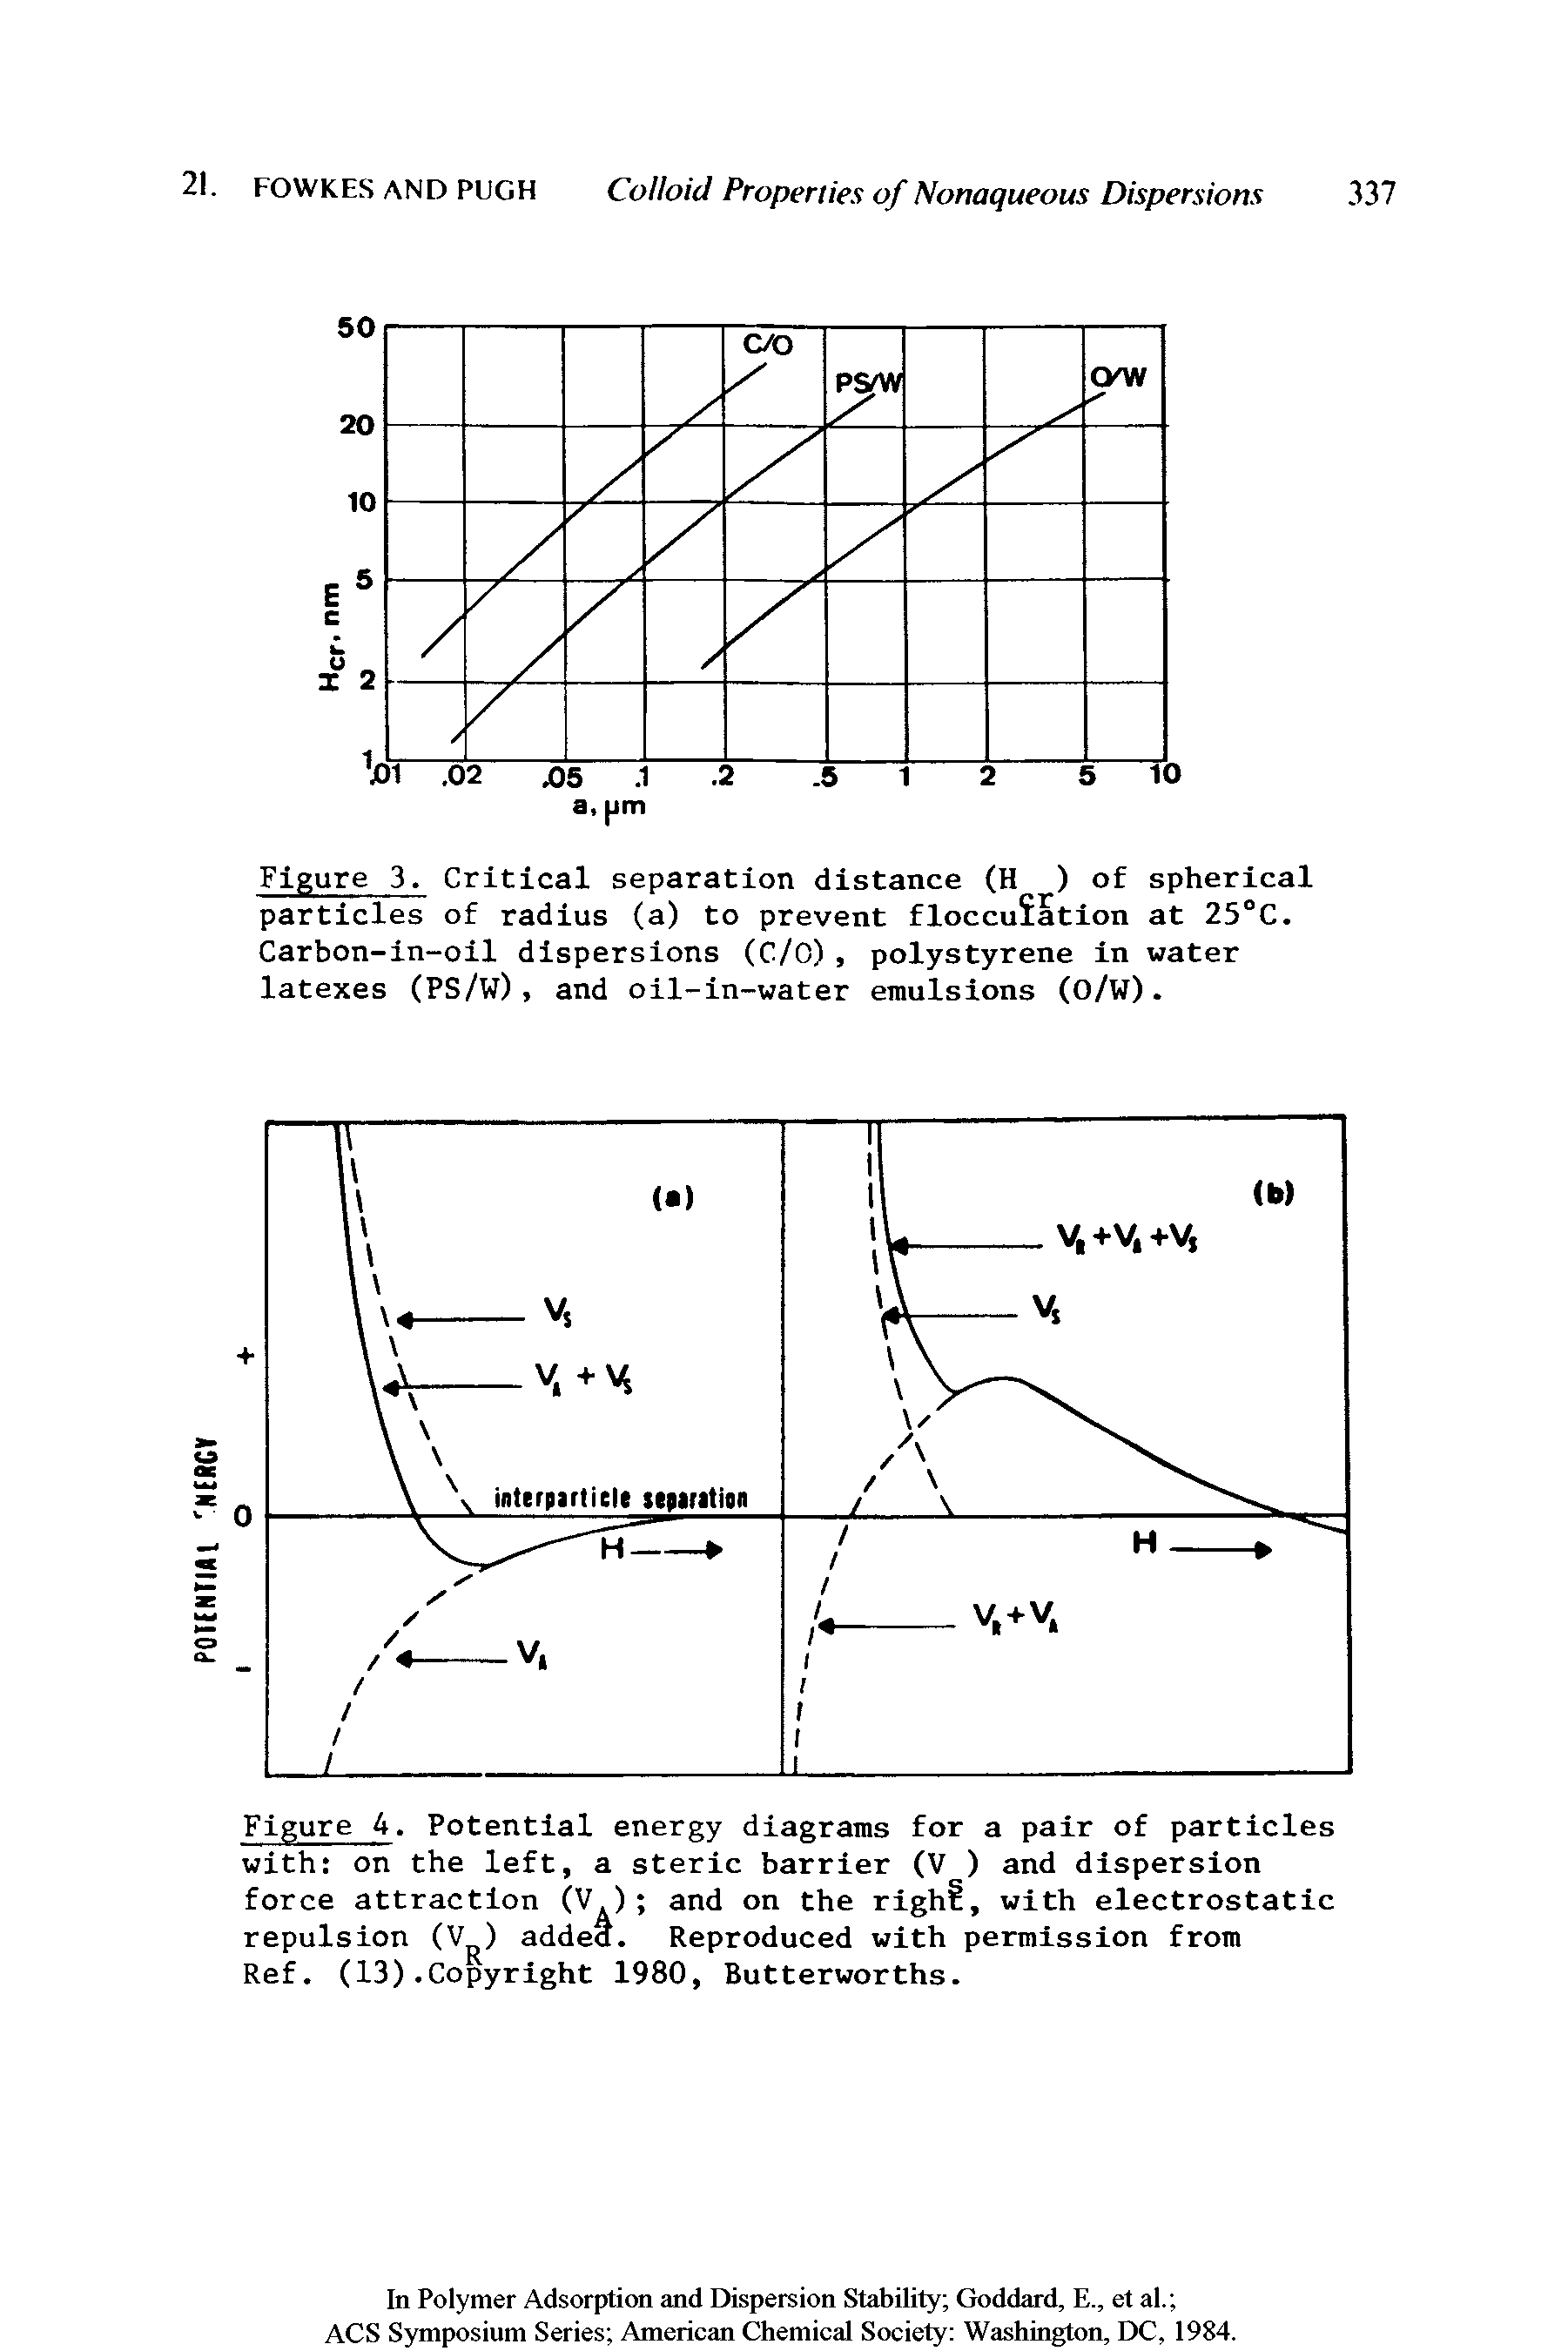 Figure 4. Potential energy diagrams for a pair of particles with on the left, a steric barrier (V ) and dispersion force attraction (V.) and on the right, with electrostatic repulsion (V ) added. Reproduced with permission from Ref. (13).Copyright 1980, Butterworths.